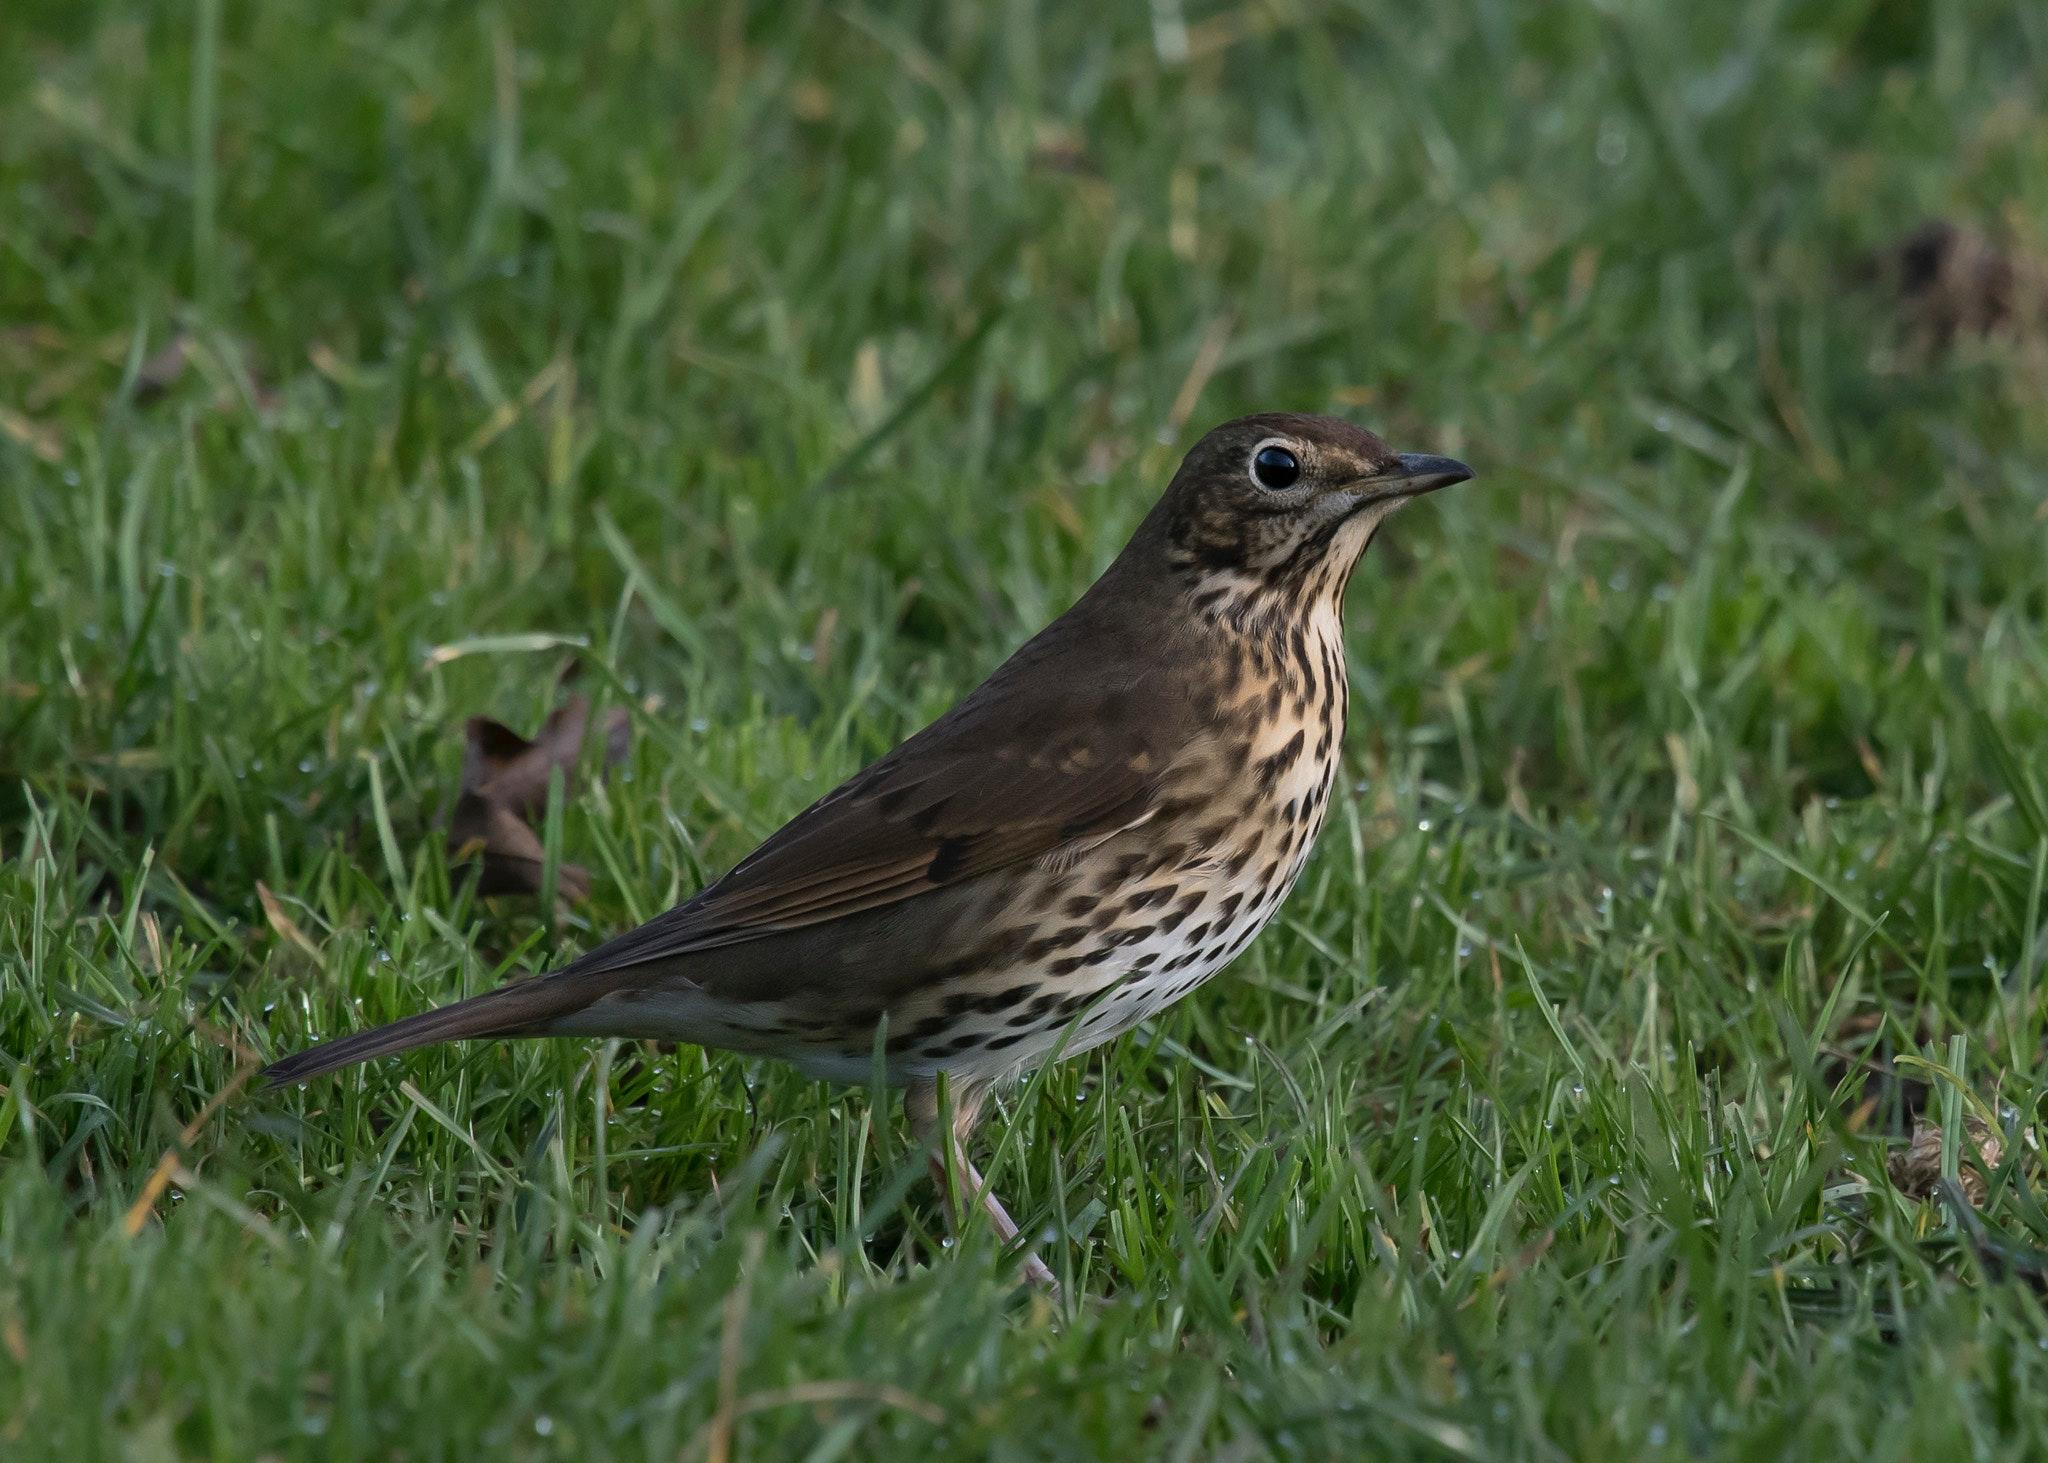 Free of grassland, Song Thrush, speckled